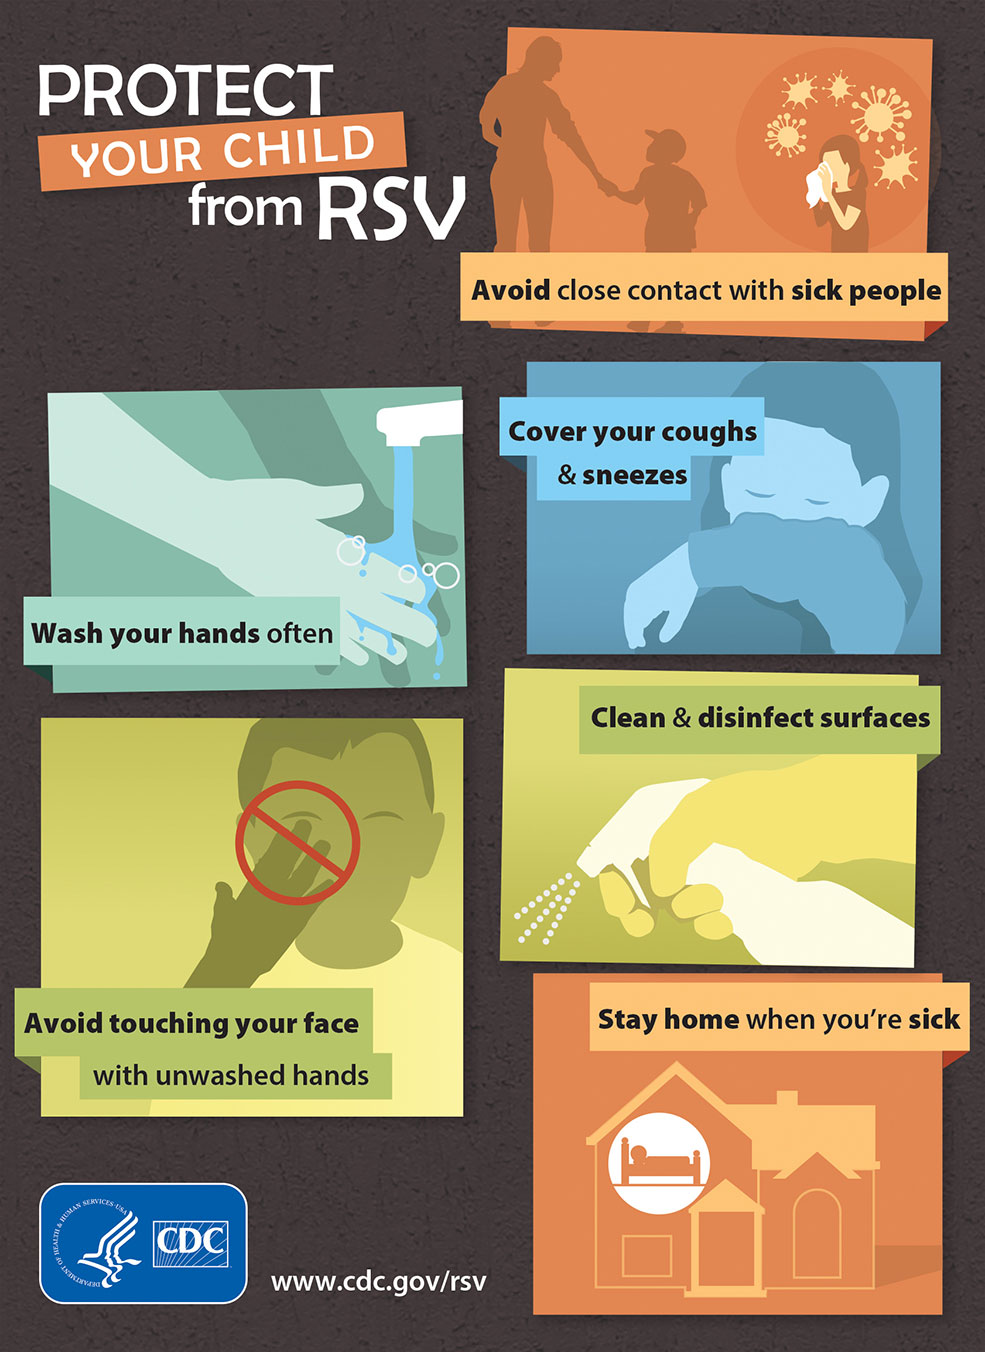 school sick to your letter child when is Child RSV  Protect Your CDC from  Infographic